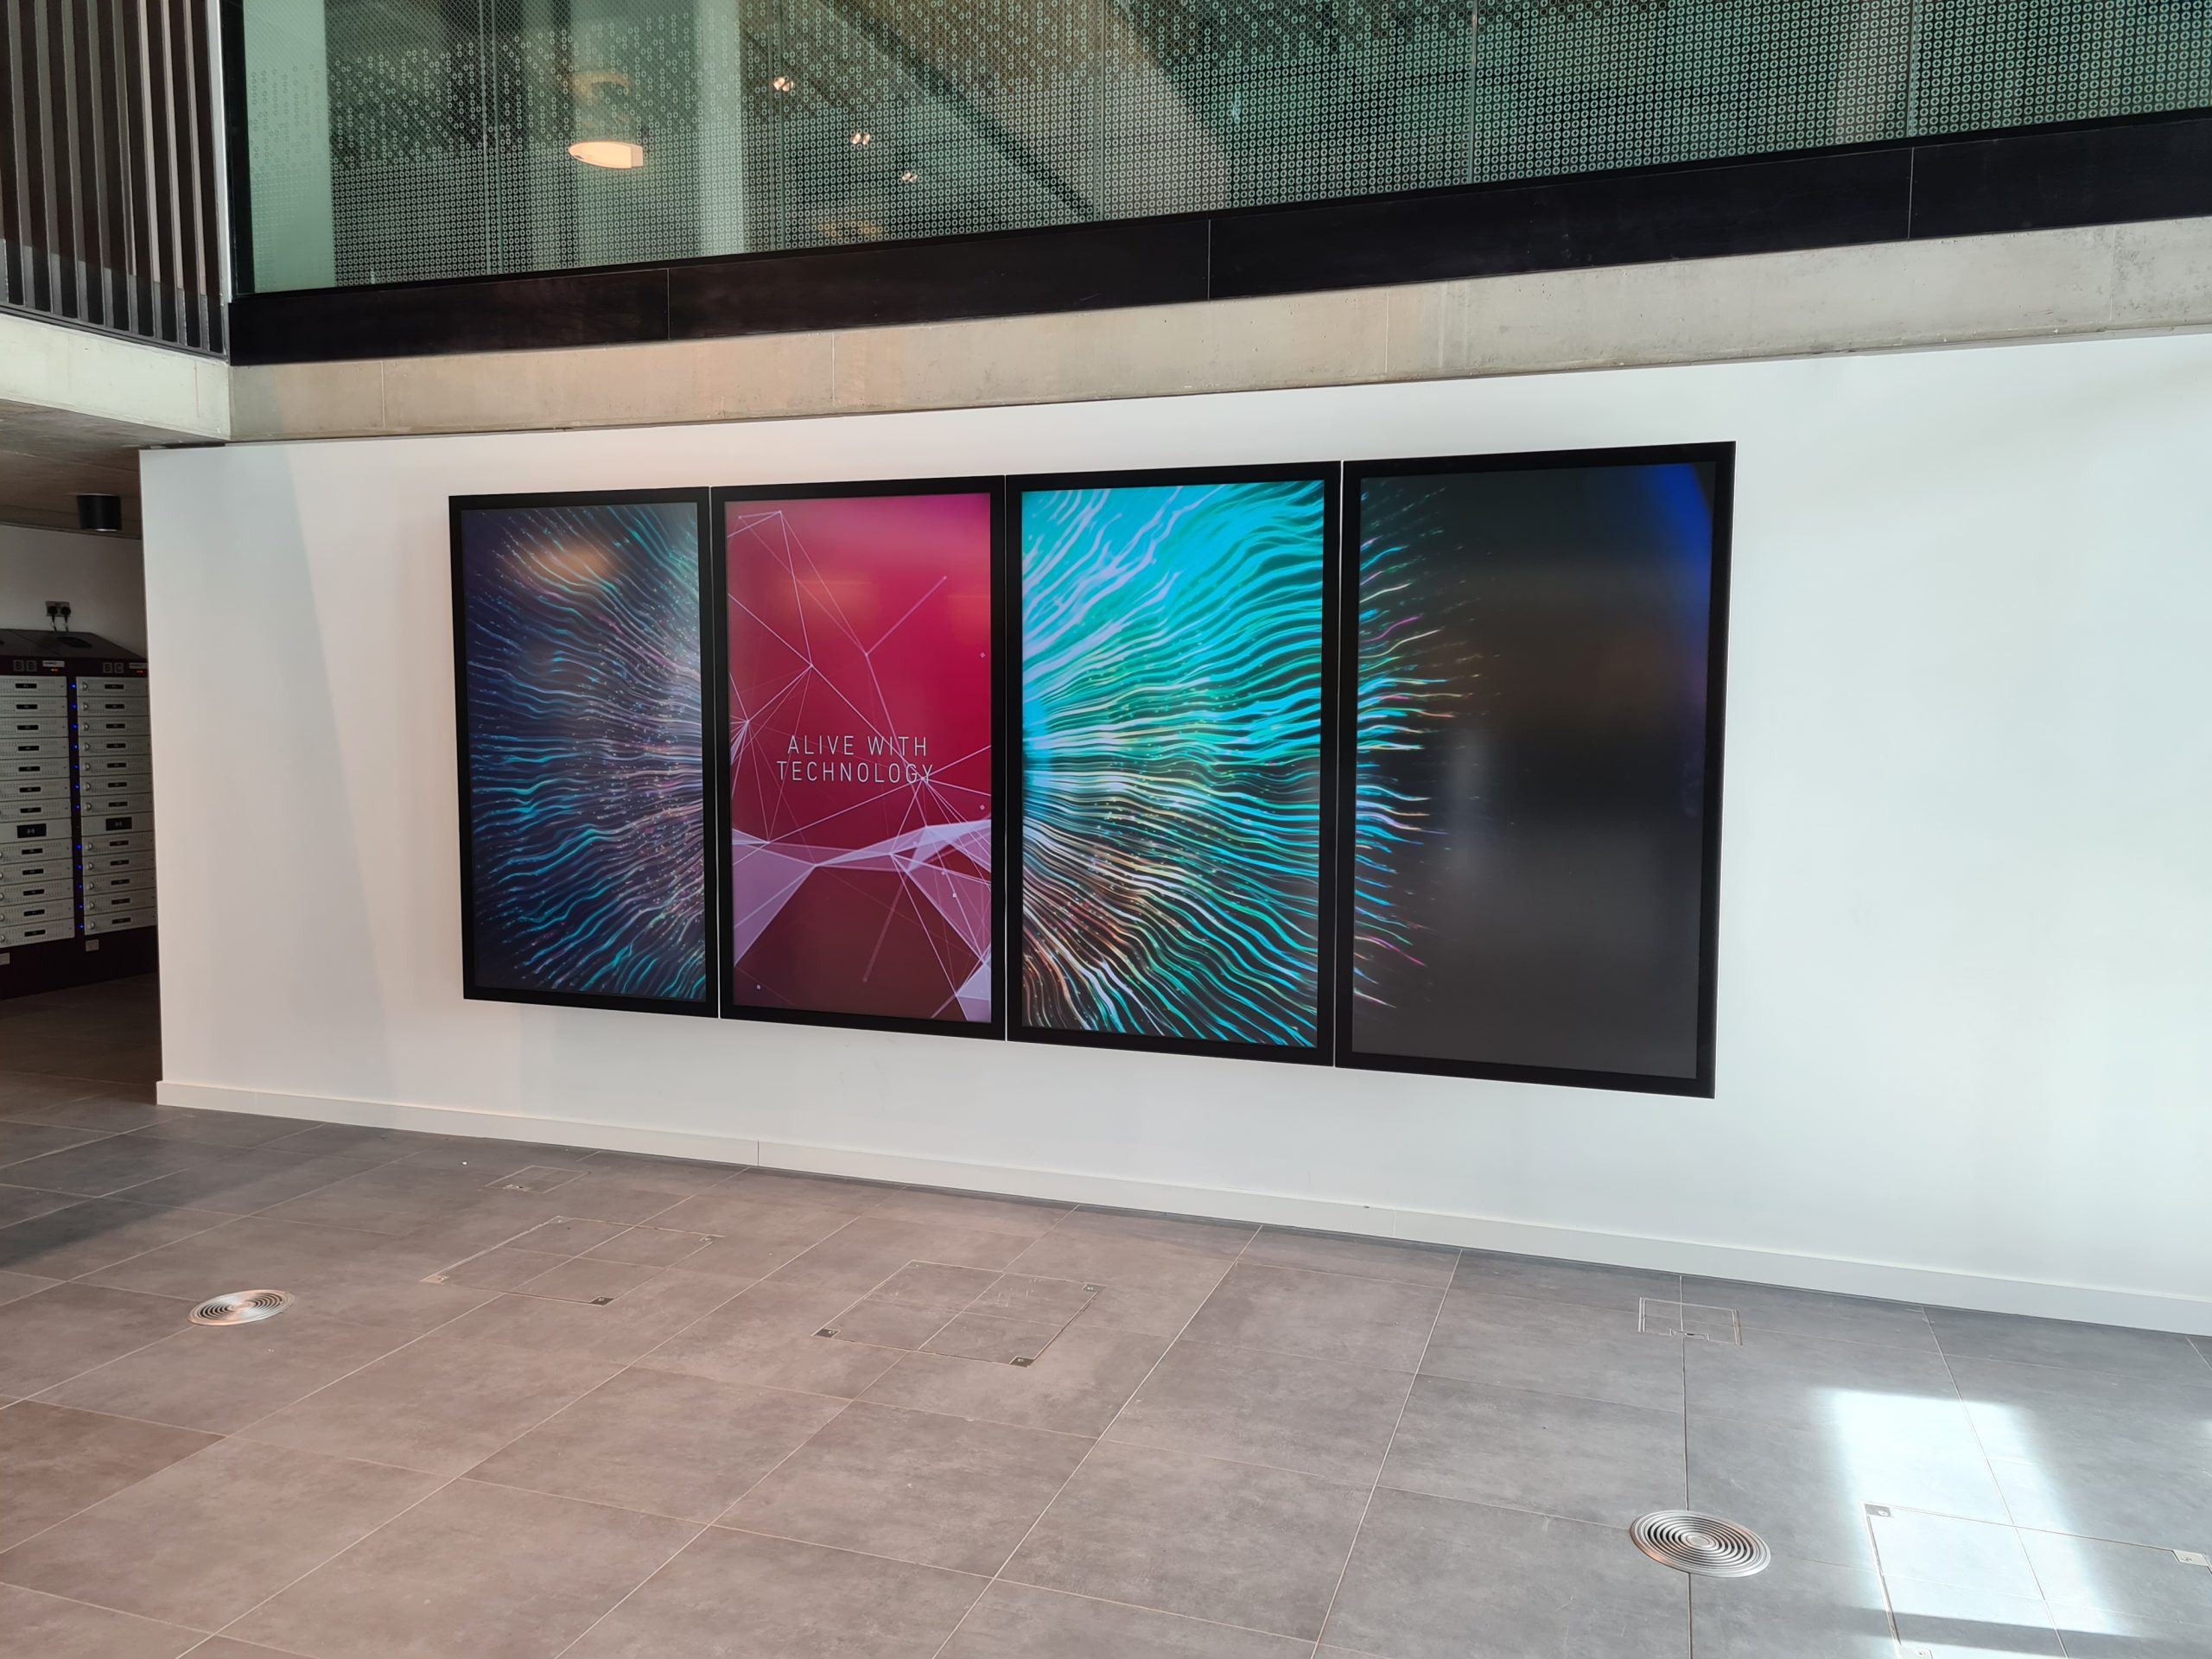 4x Portrait Digital Signage Screens Acting as One 